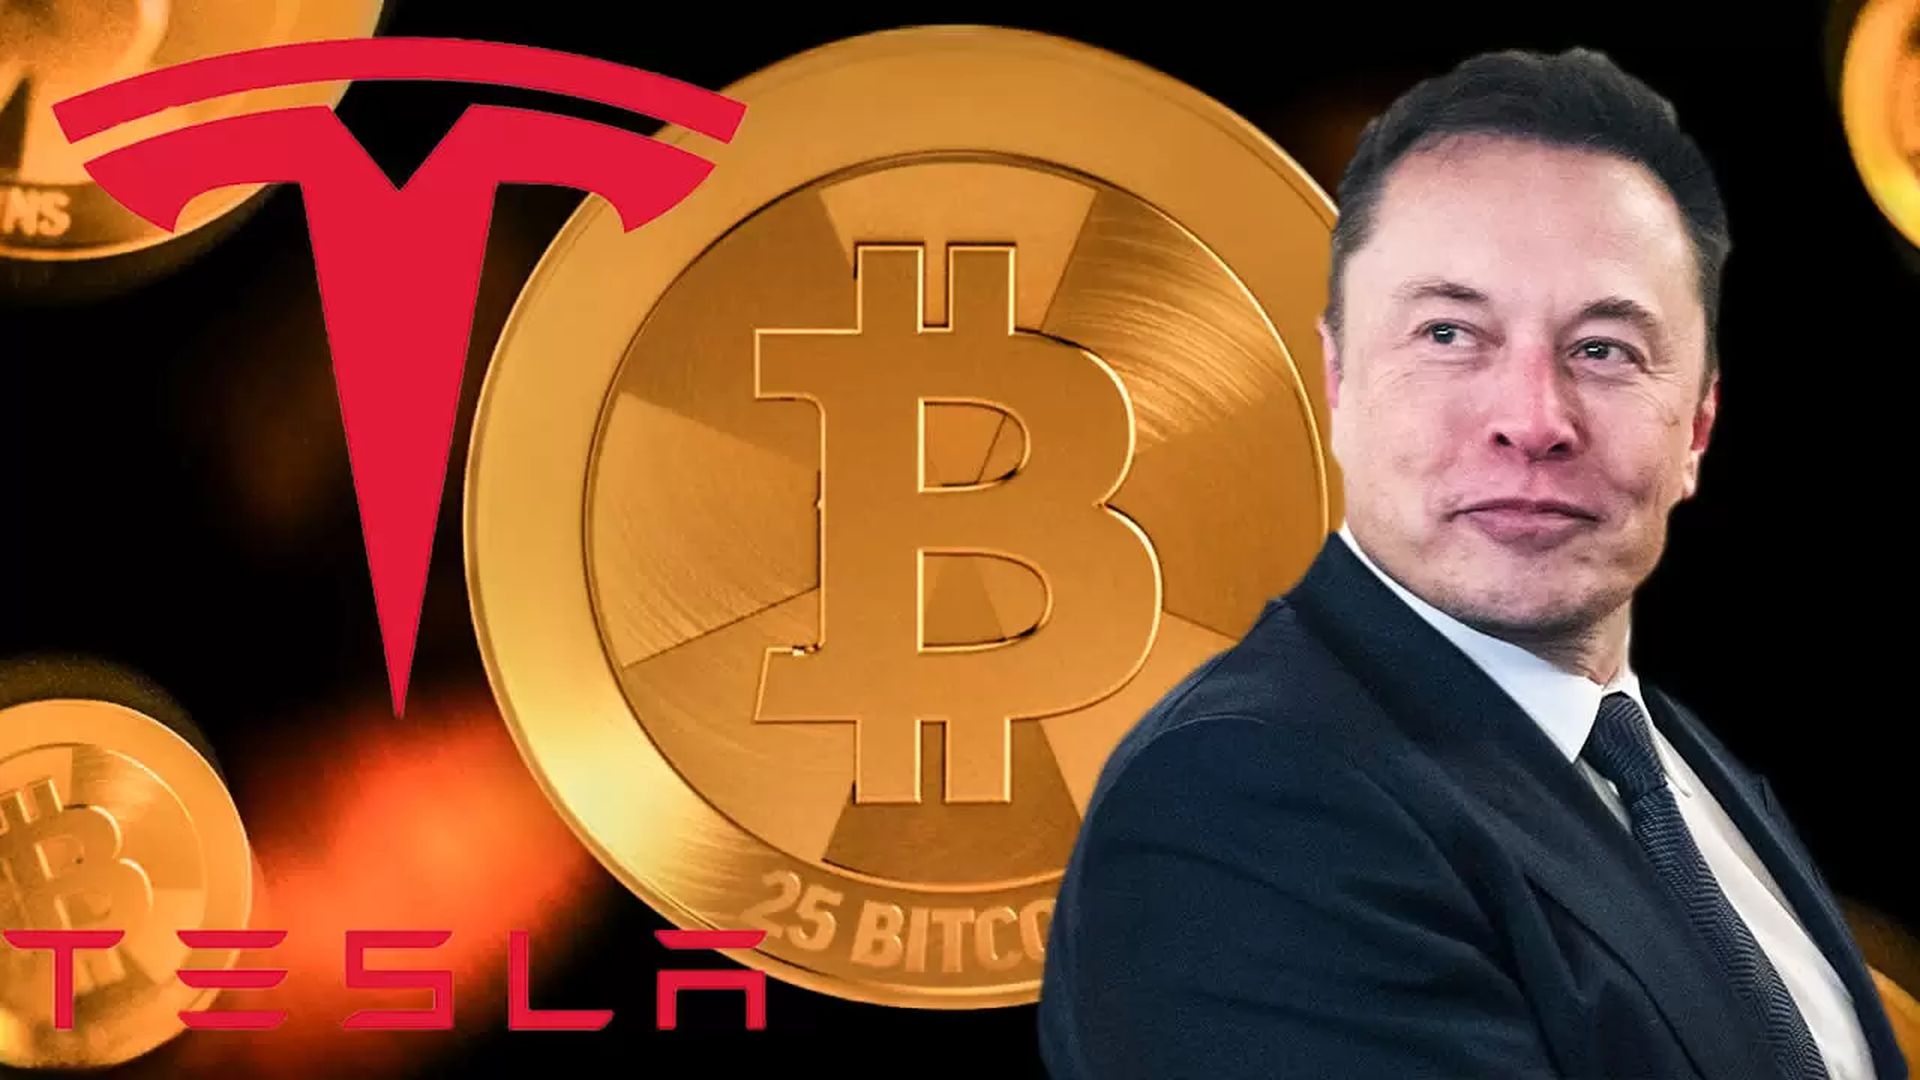 Today we've learned that Tesla sold bitcoin. Let's discuss what does this mean for the market and explain why did Tesla sell its Bitcoin holdings?